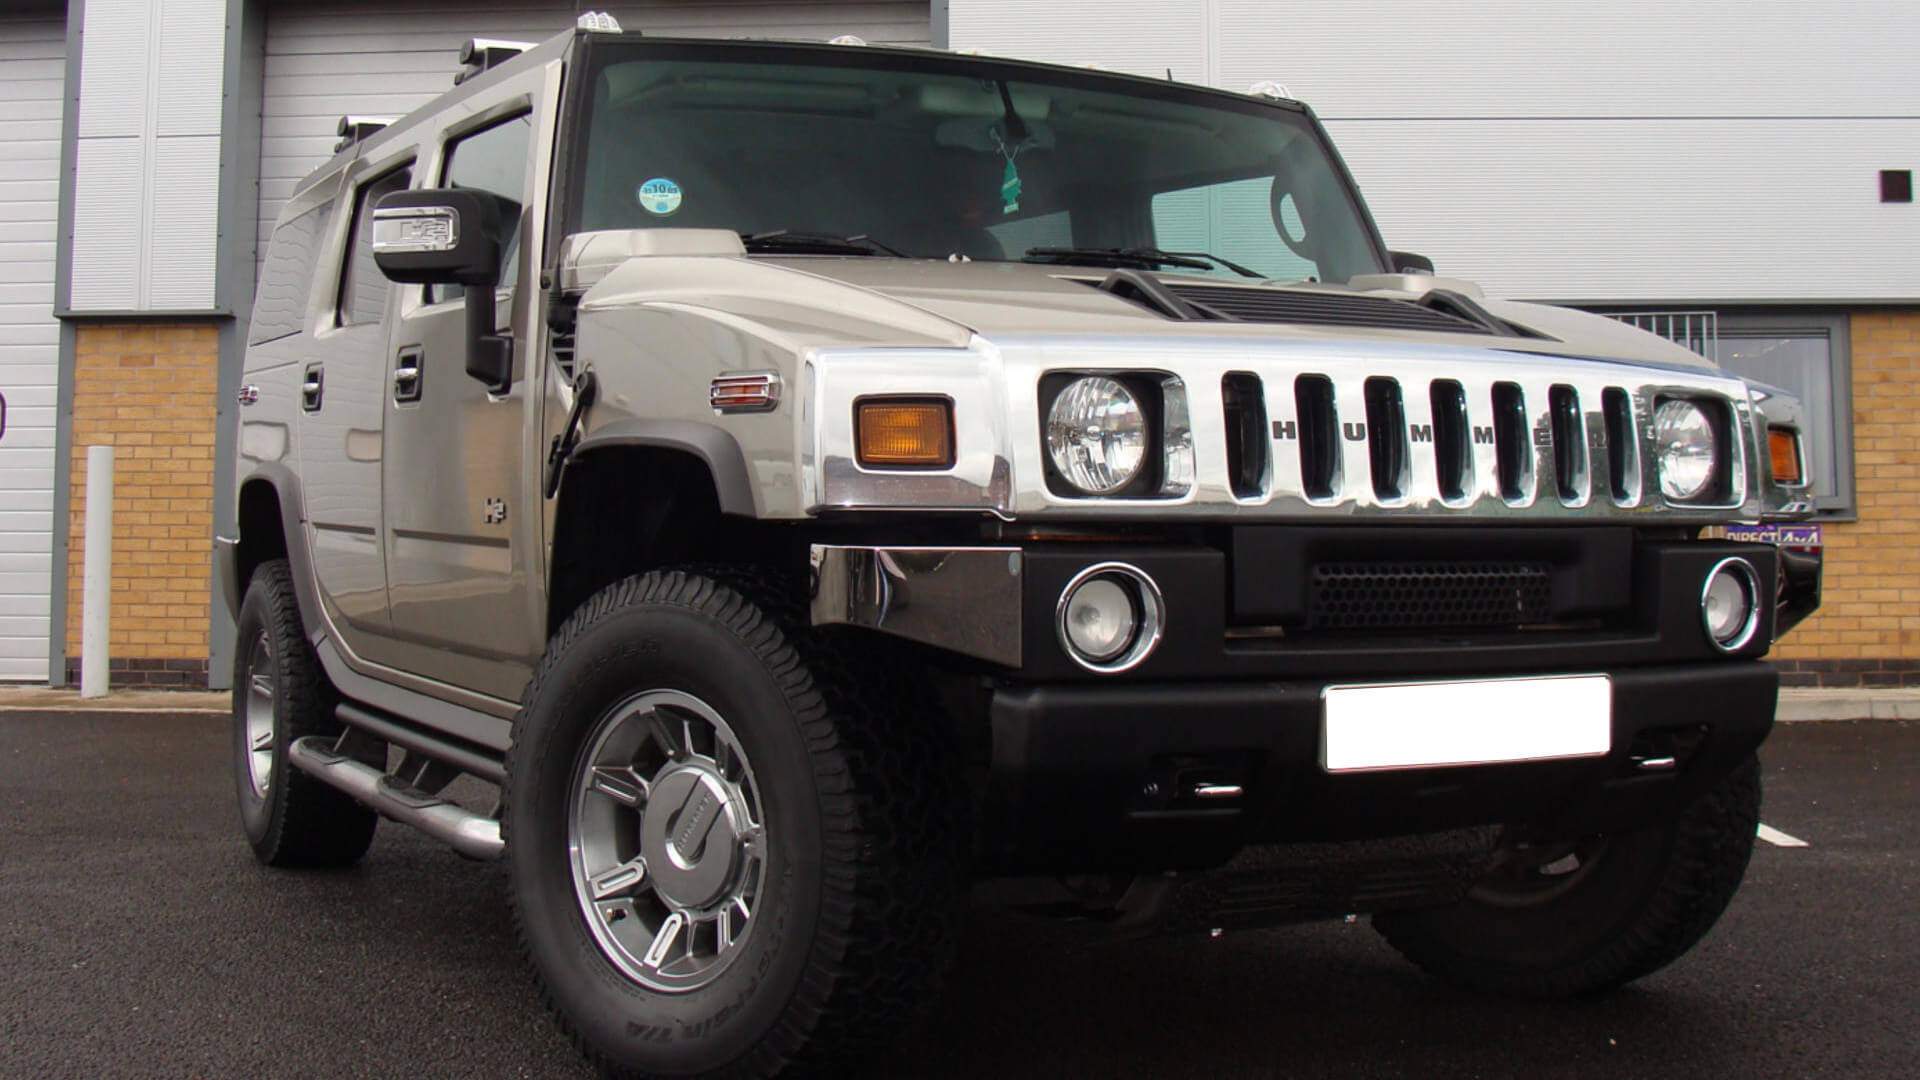 Direct4x4 Accessories for Hummer Vehicles